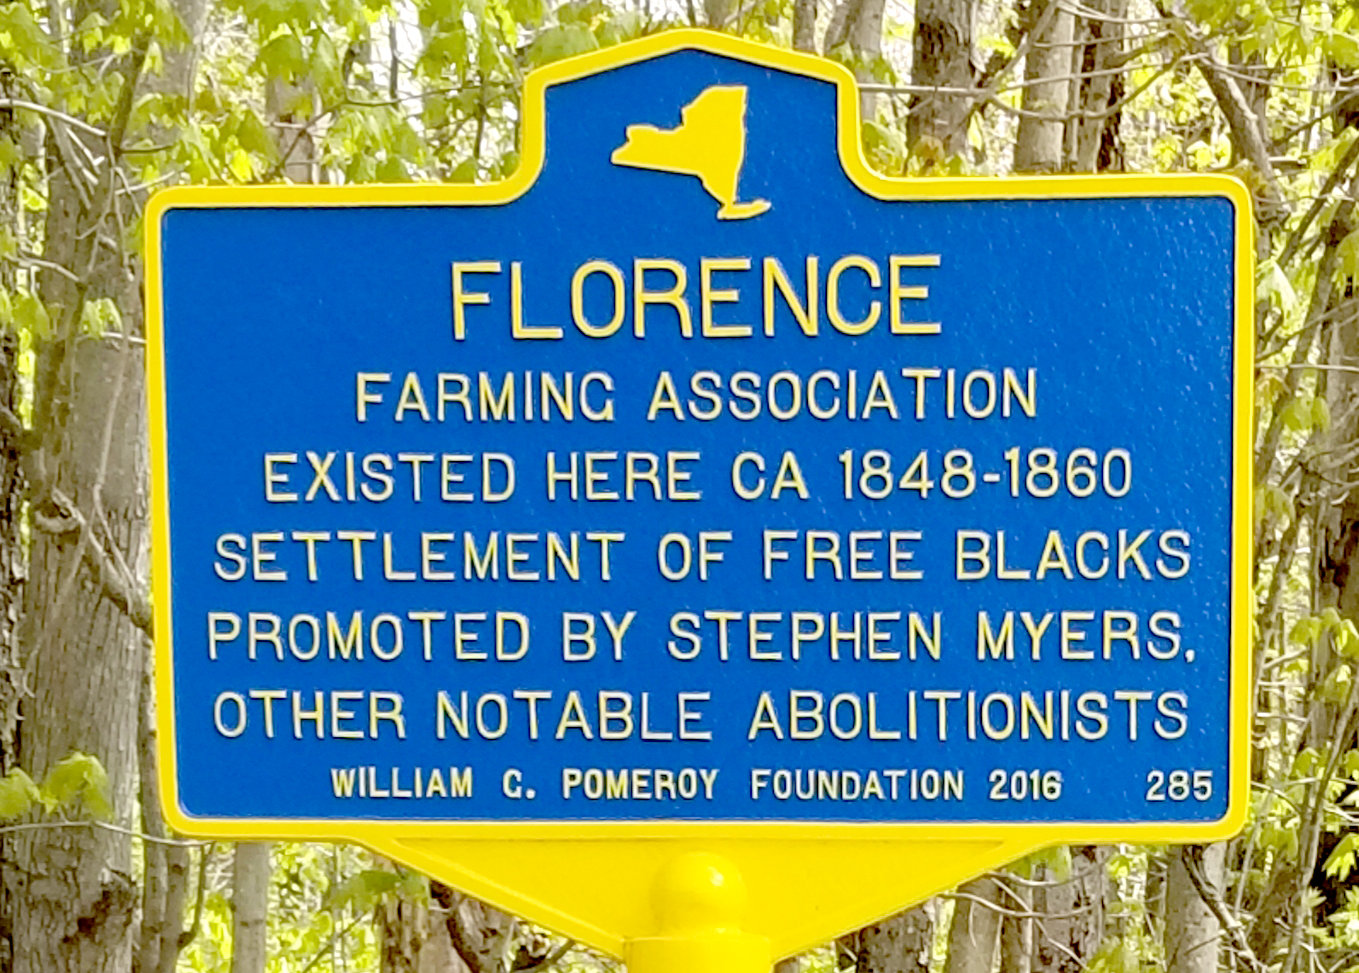 In 2017, a Pomeroy sign was installed marking the Florence Farming Association.